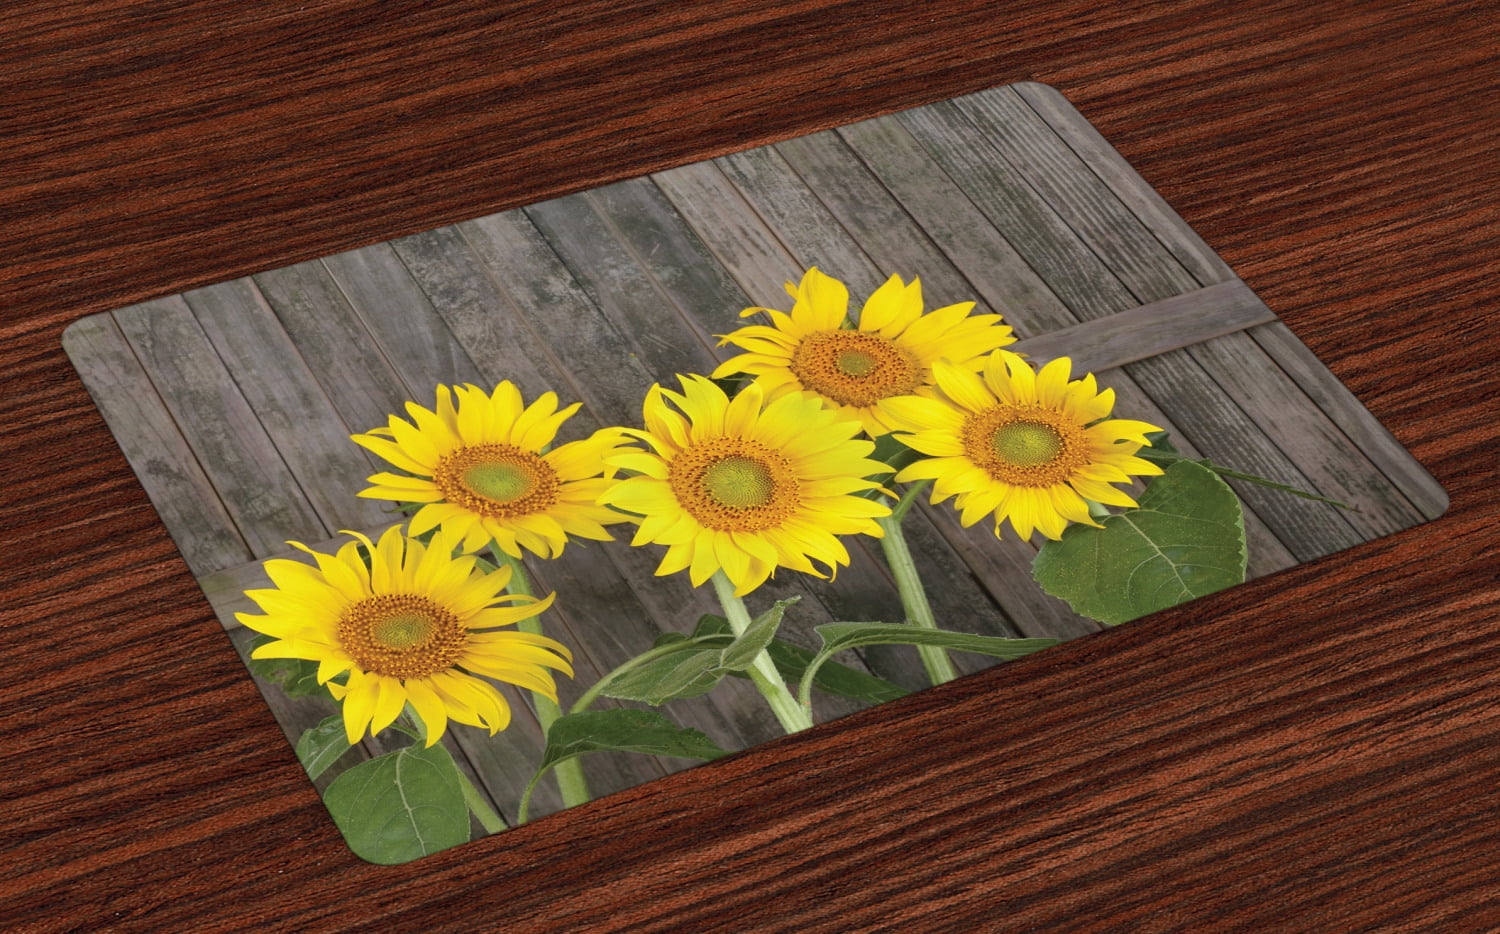 Sunflower Field Placemats Set of 4 for Dining Table Washable Heat Resistant Kitchen Mats,12x18in